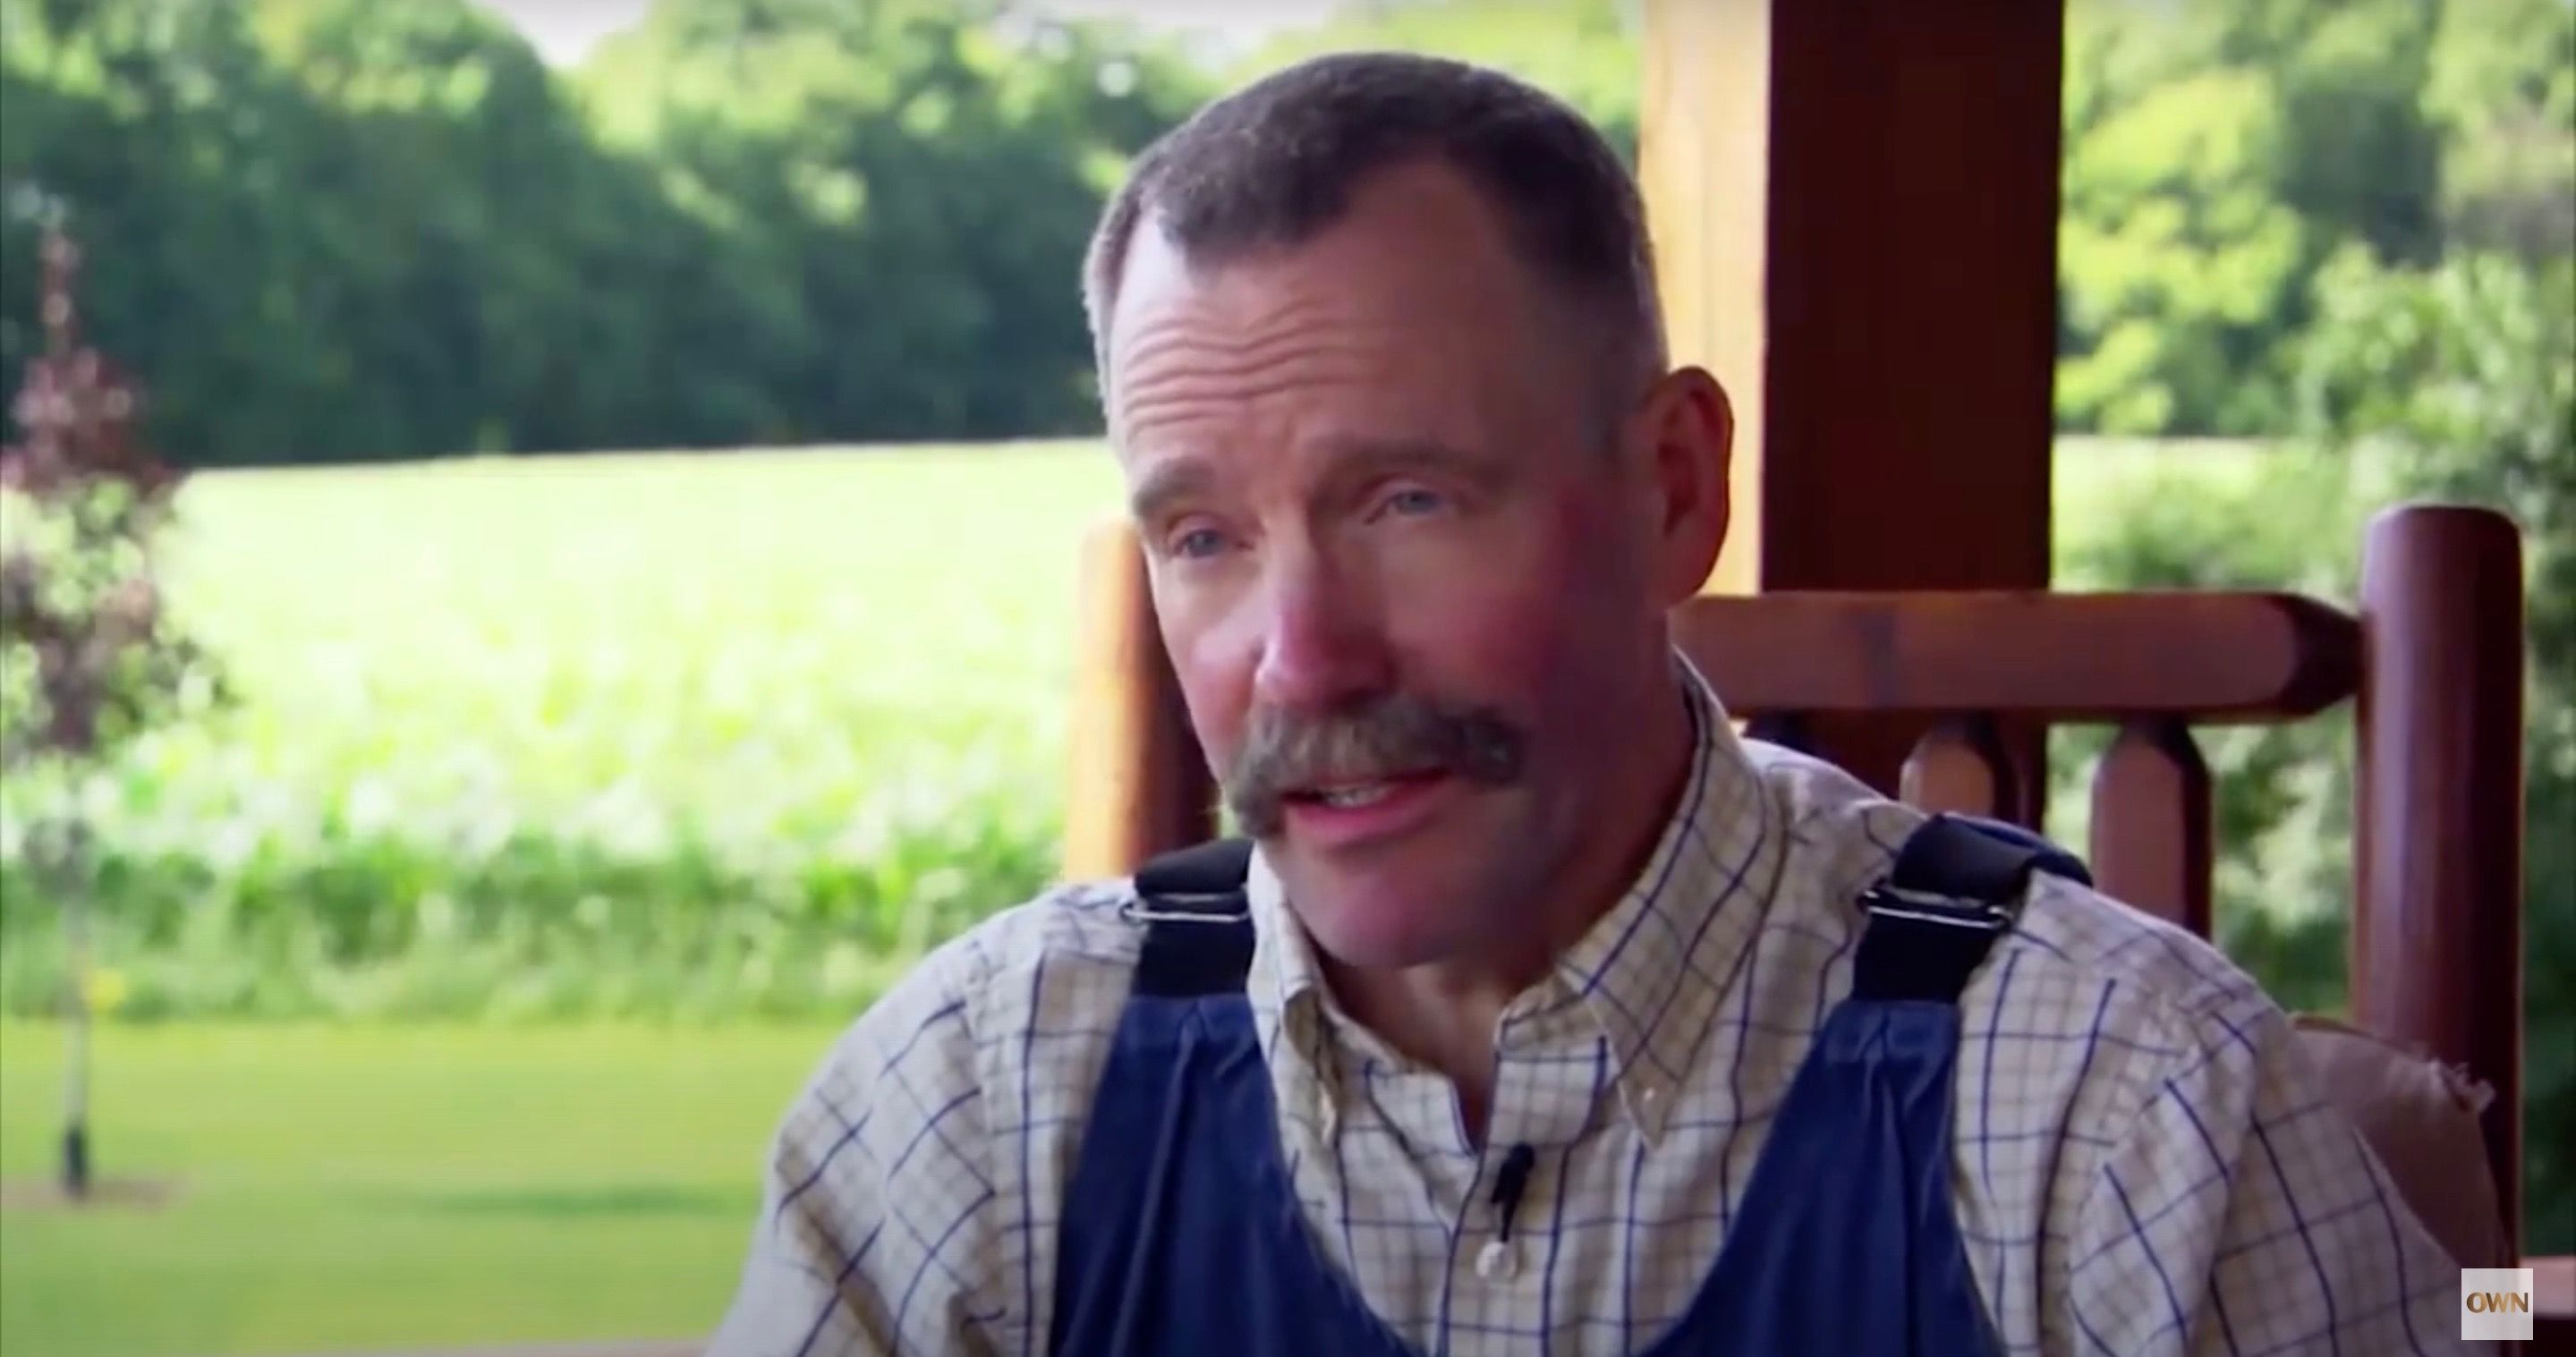 Peter Ostrum wearing a plaid shirt with overalls on top and talking to Oprah.